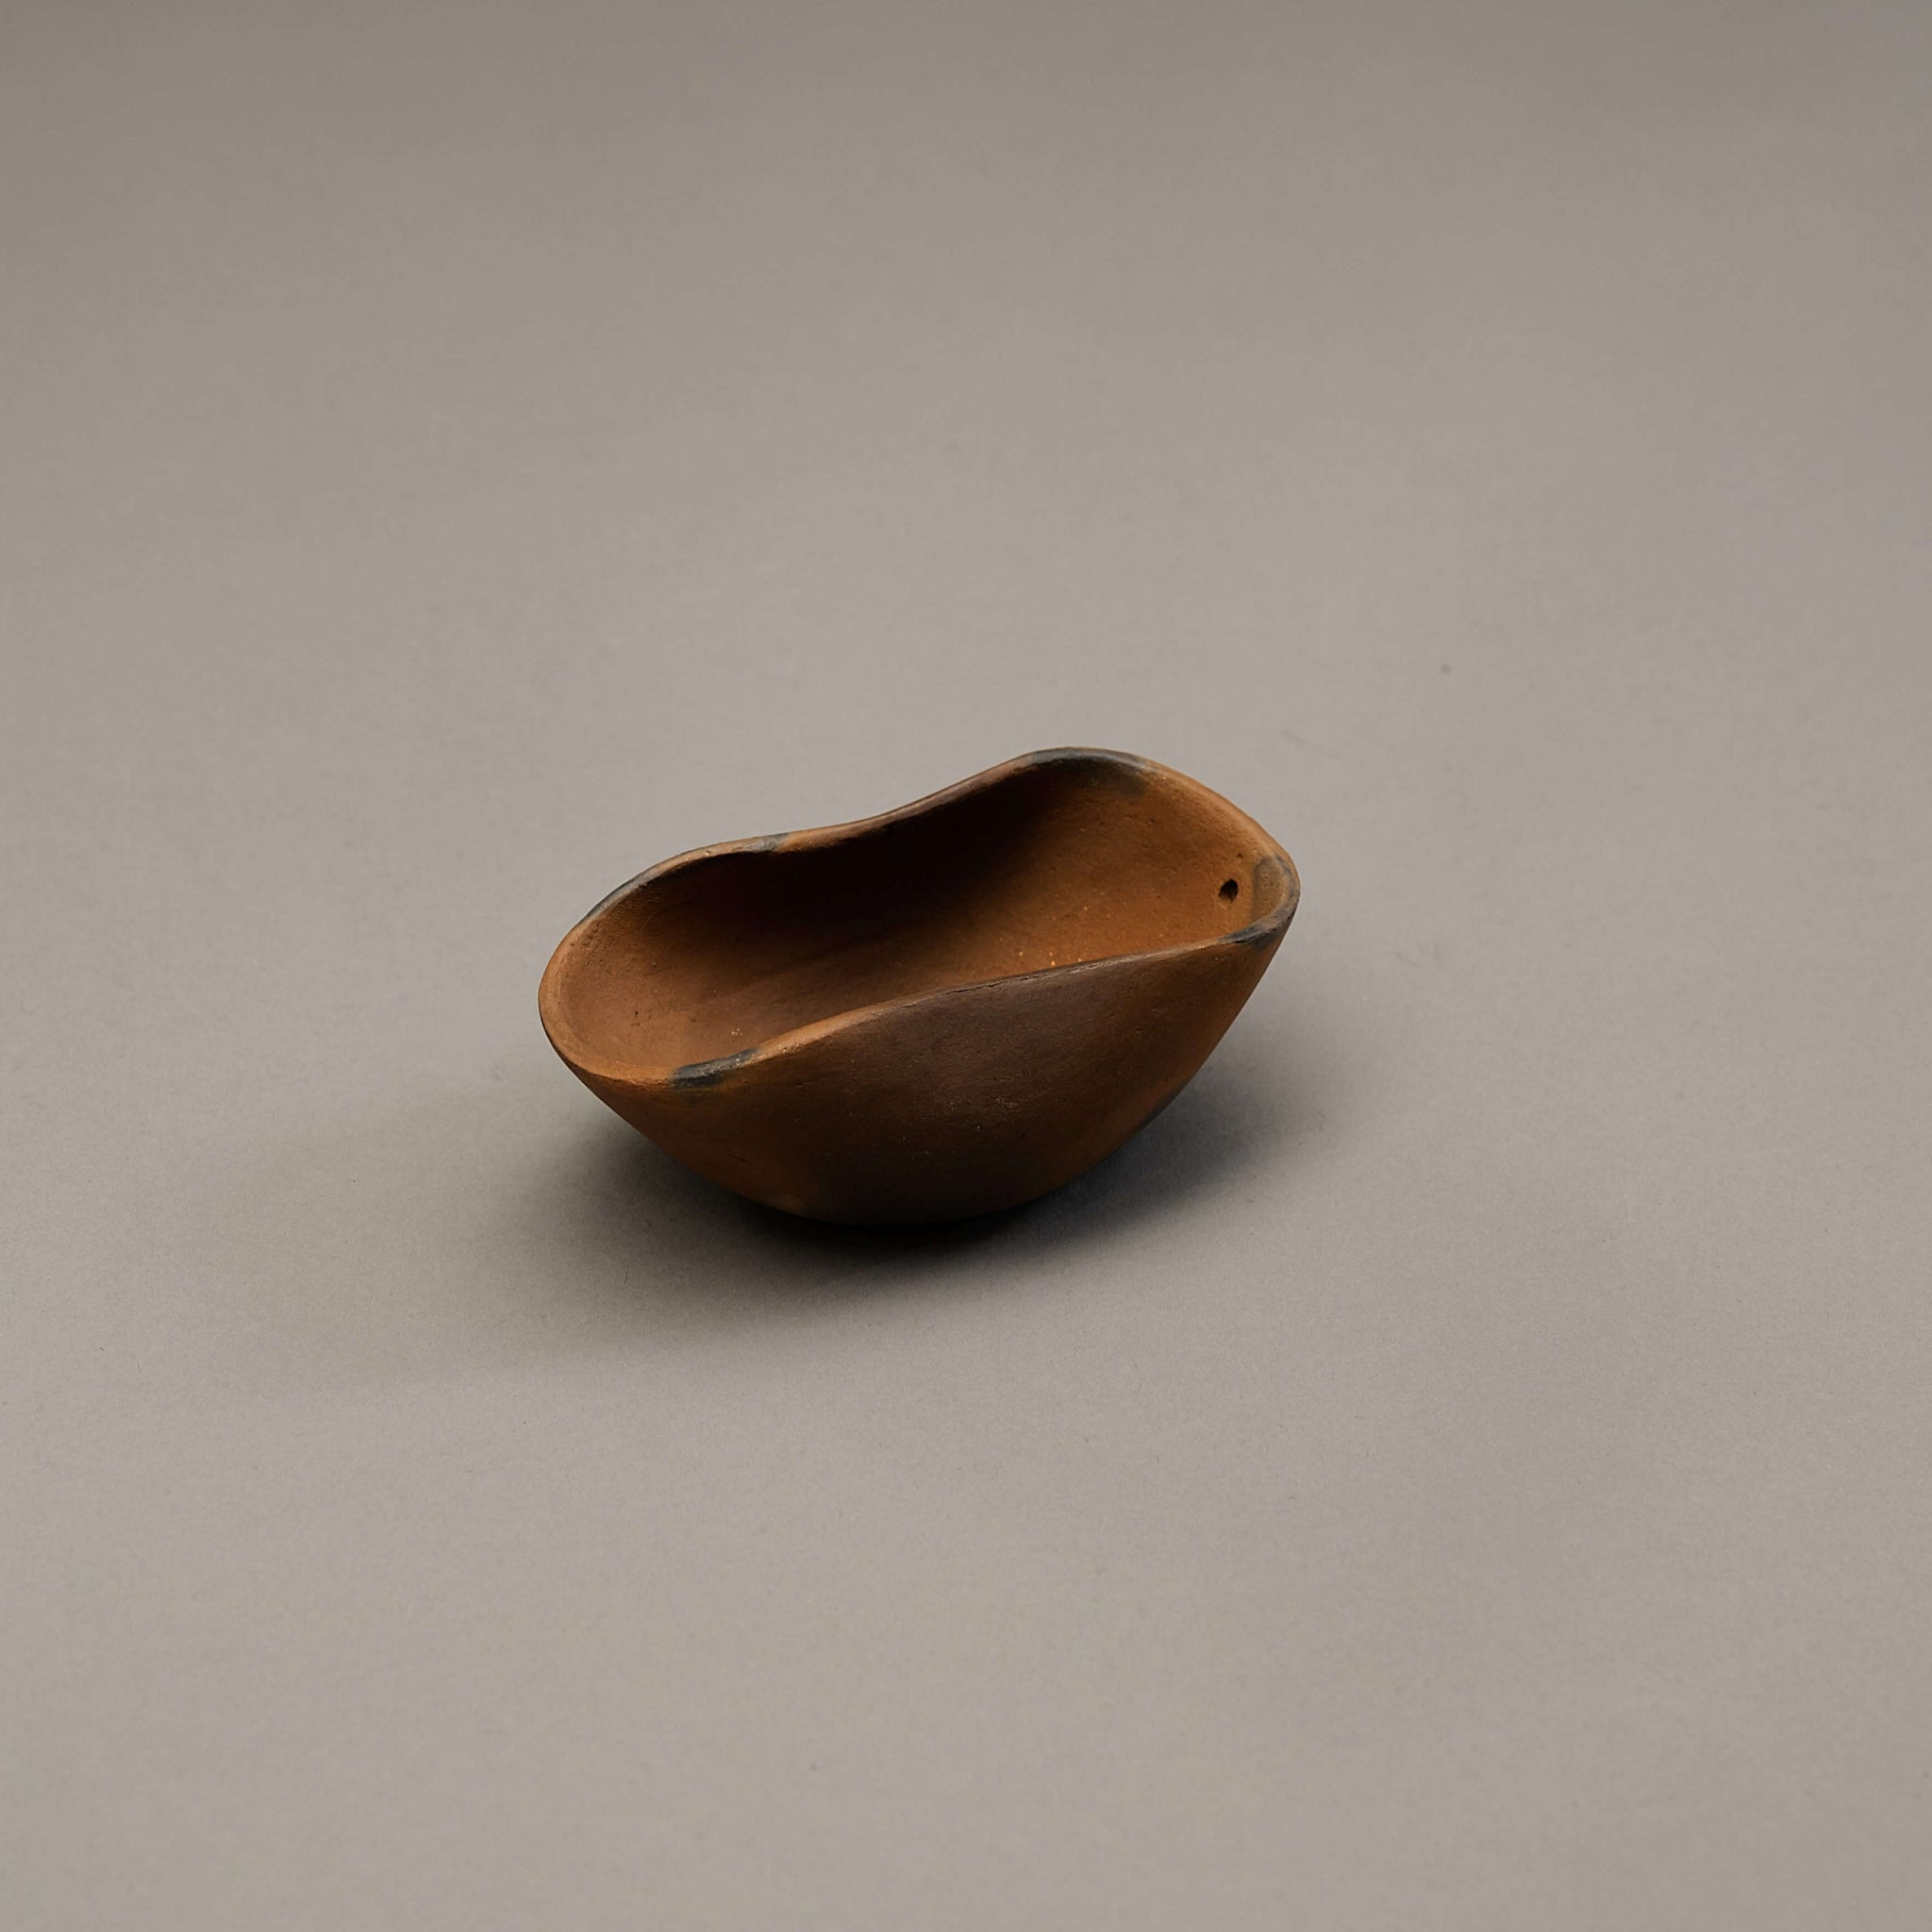 A sculptural incense holder made of clay.